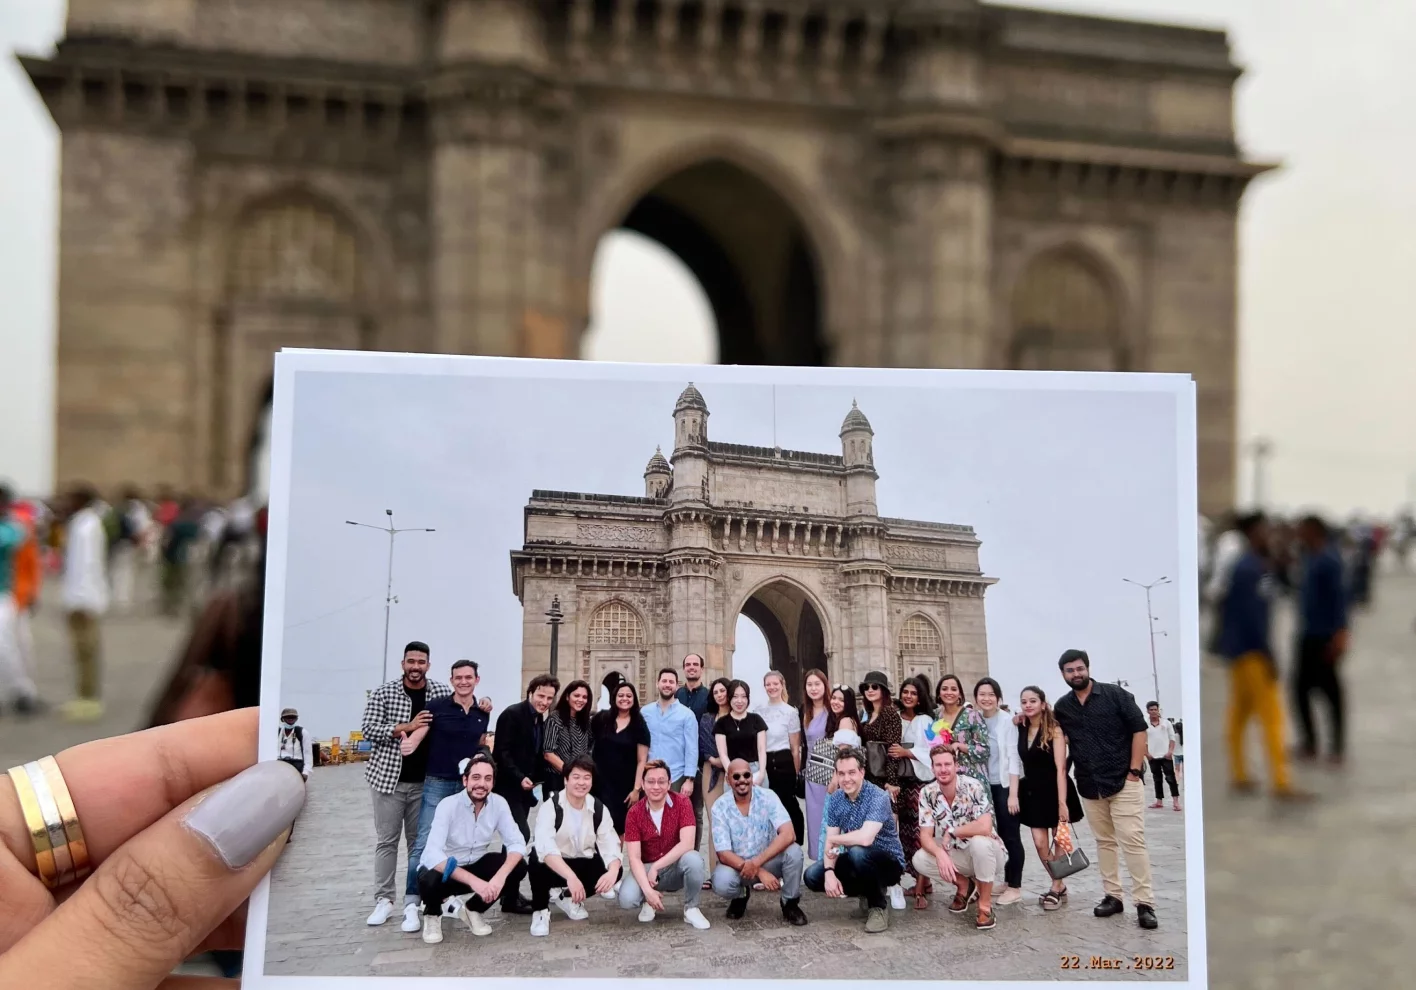 Woman's hand holding a photo of a group of people posing in front of an archway landmark with actual landmark in background.  